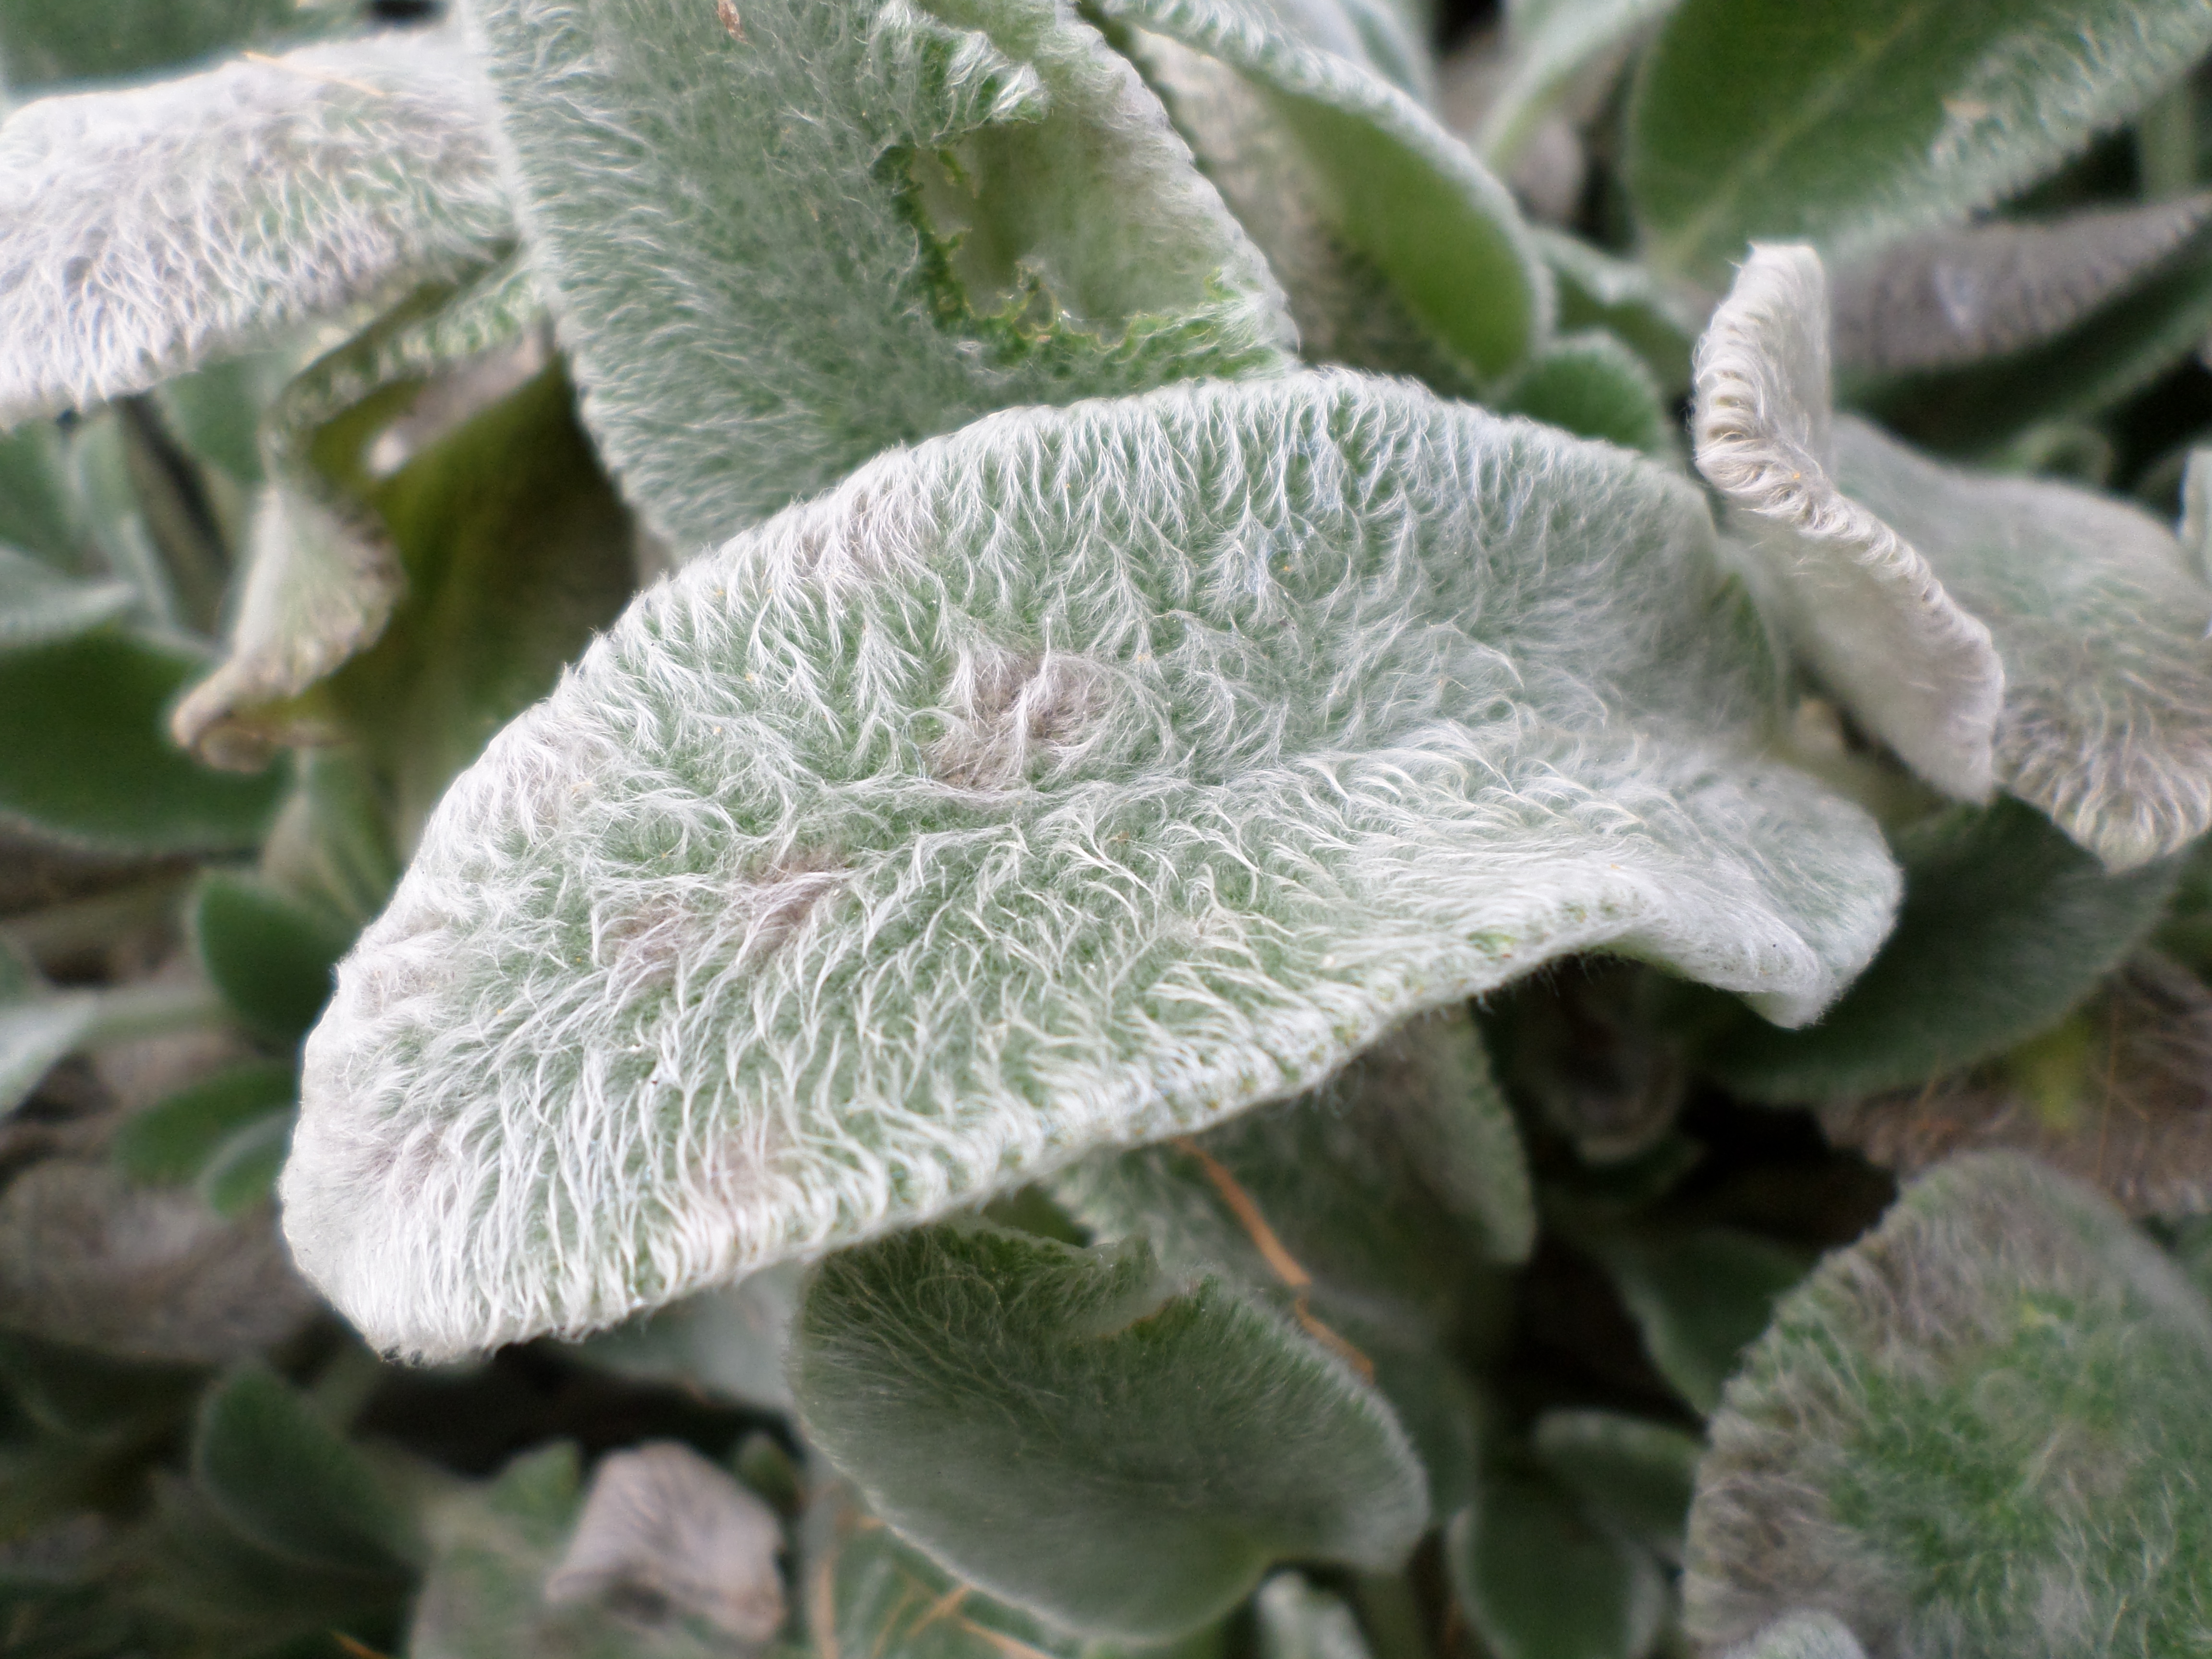 Lambs ear or stachys byzantina leaves photo